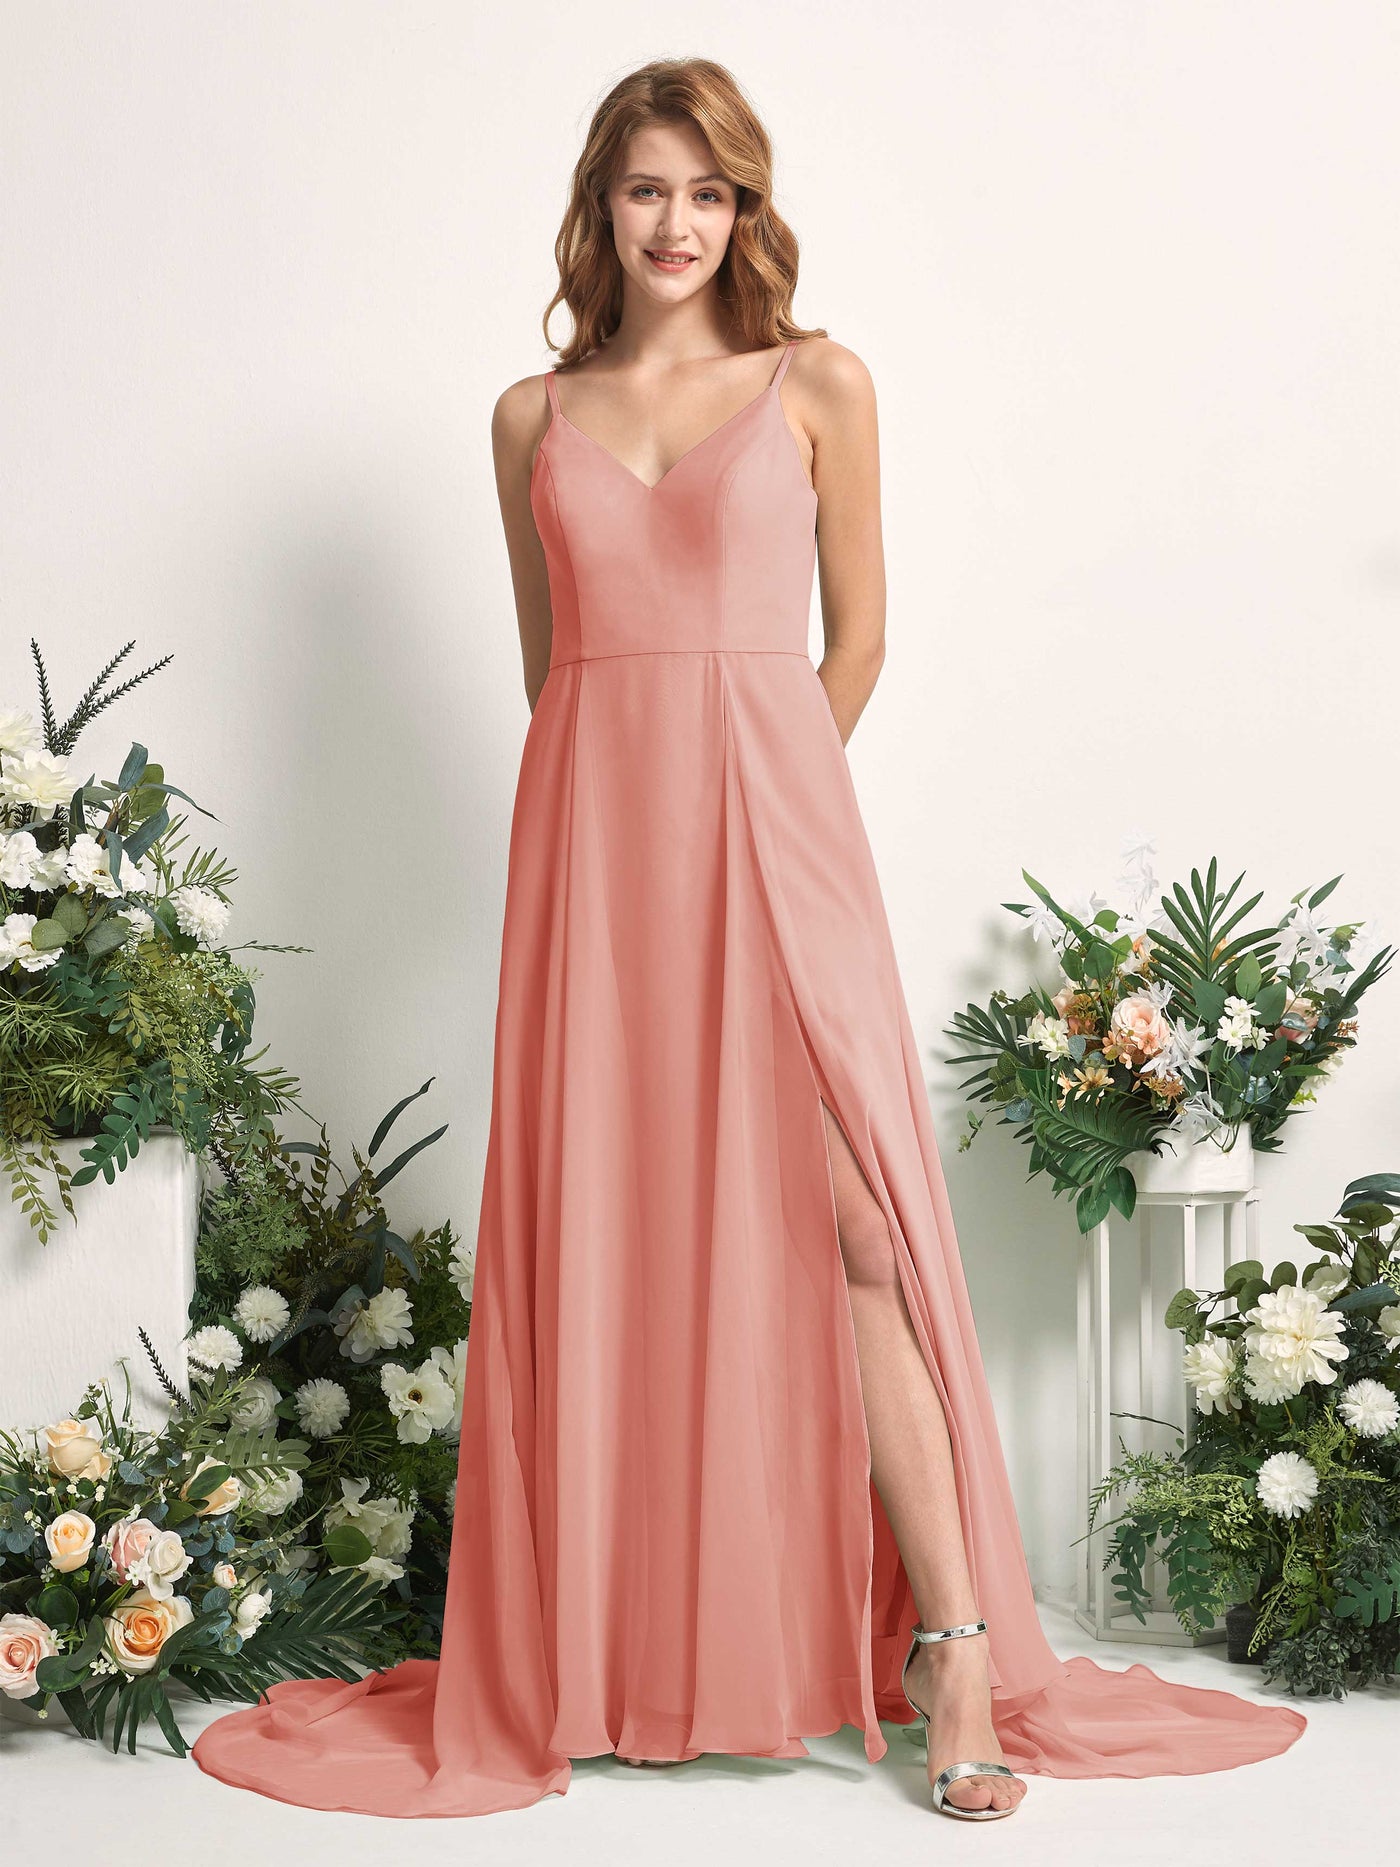 Bridesmaid Dress A-line Chiffon Spaghetti-straps Full Length Sleeveless Wedding Party Dress - Champagne Rose (81227706)#color_champagne-rose